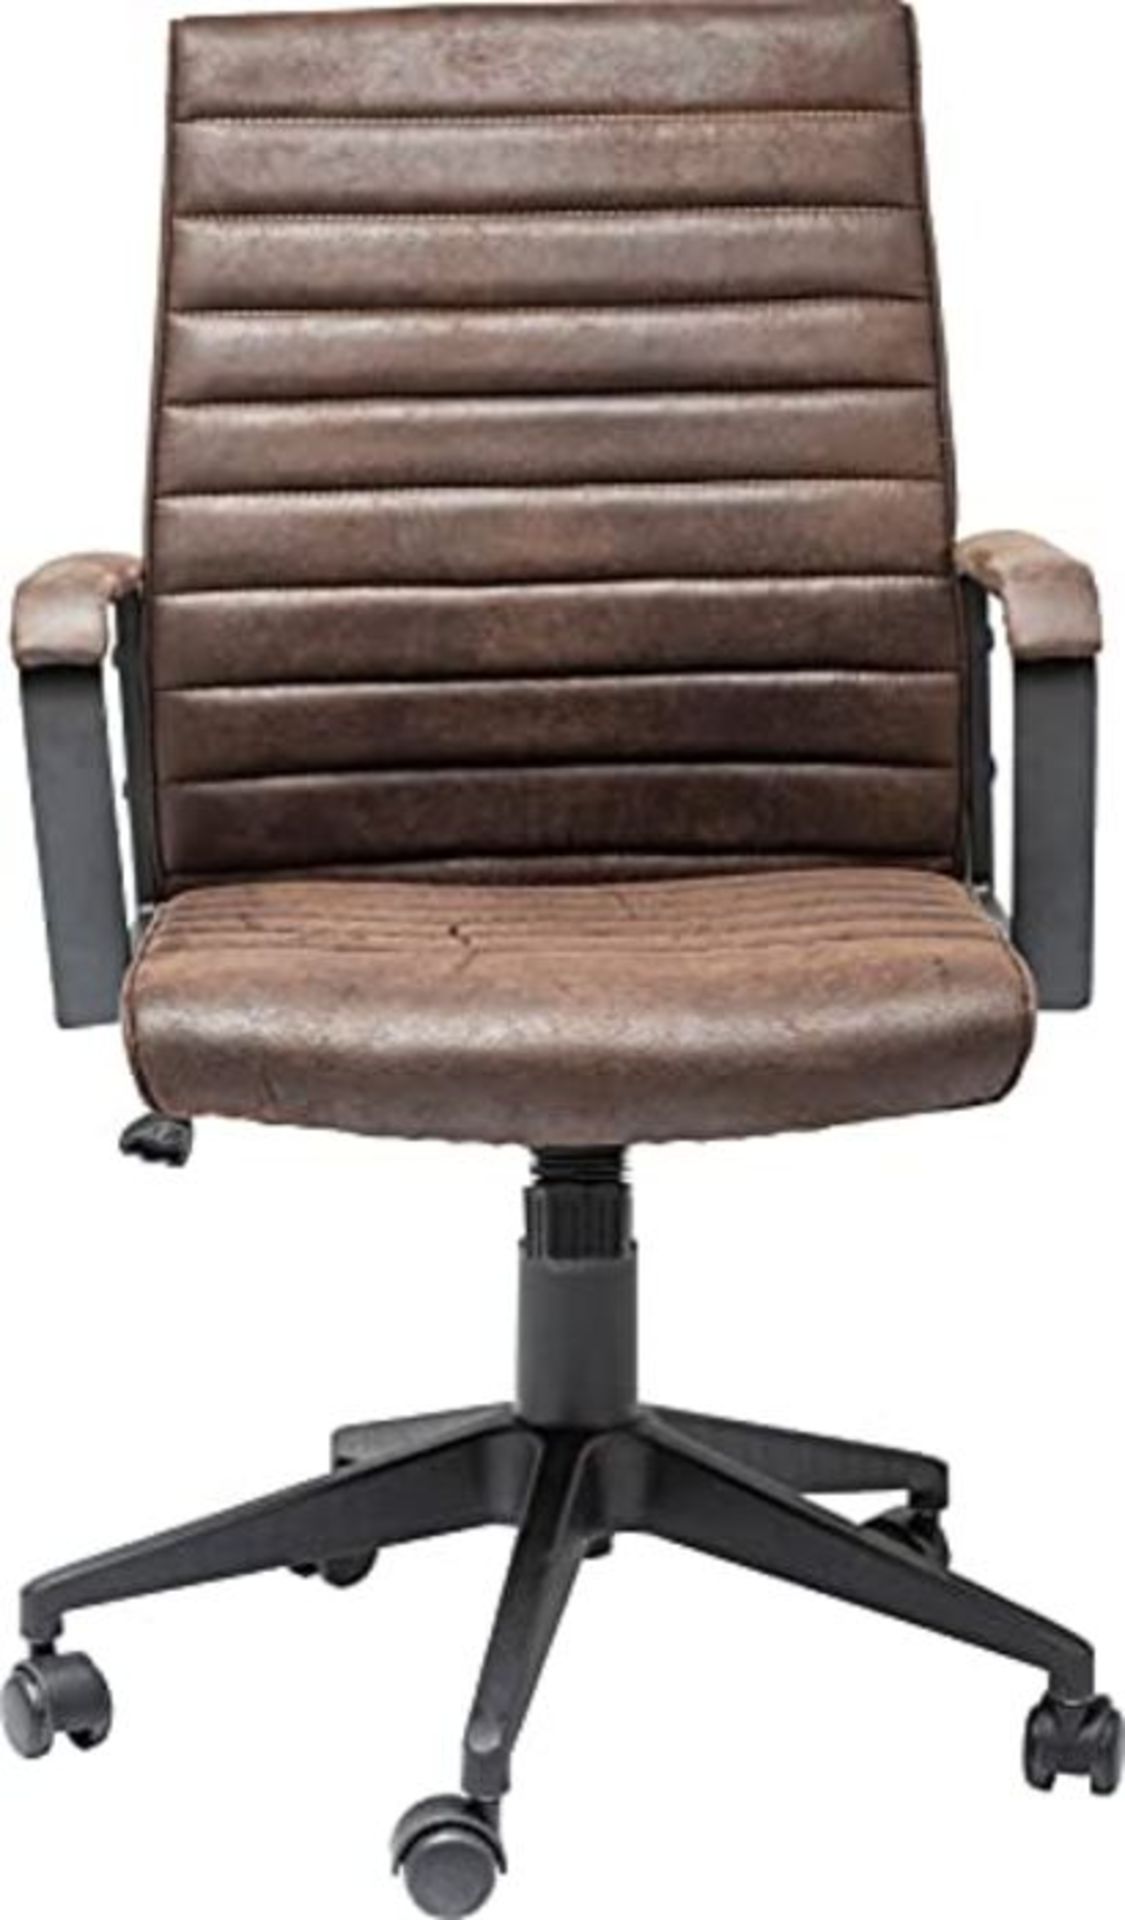 RRP £135.00 [INCOMPLETE] Kare Labora Office Swivel Chair, faux leather, Brown, 61 x 57 x 105 cm - Image 2 of 3